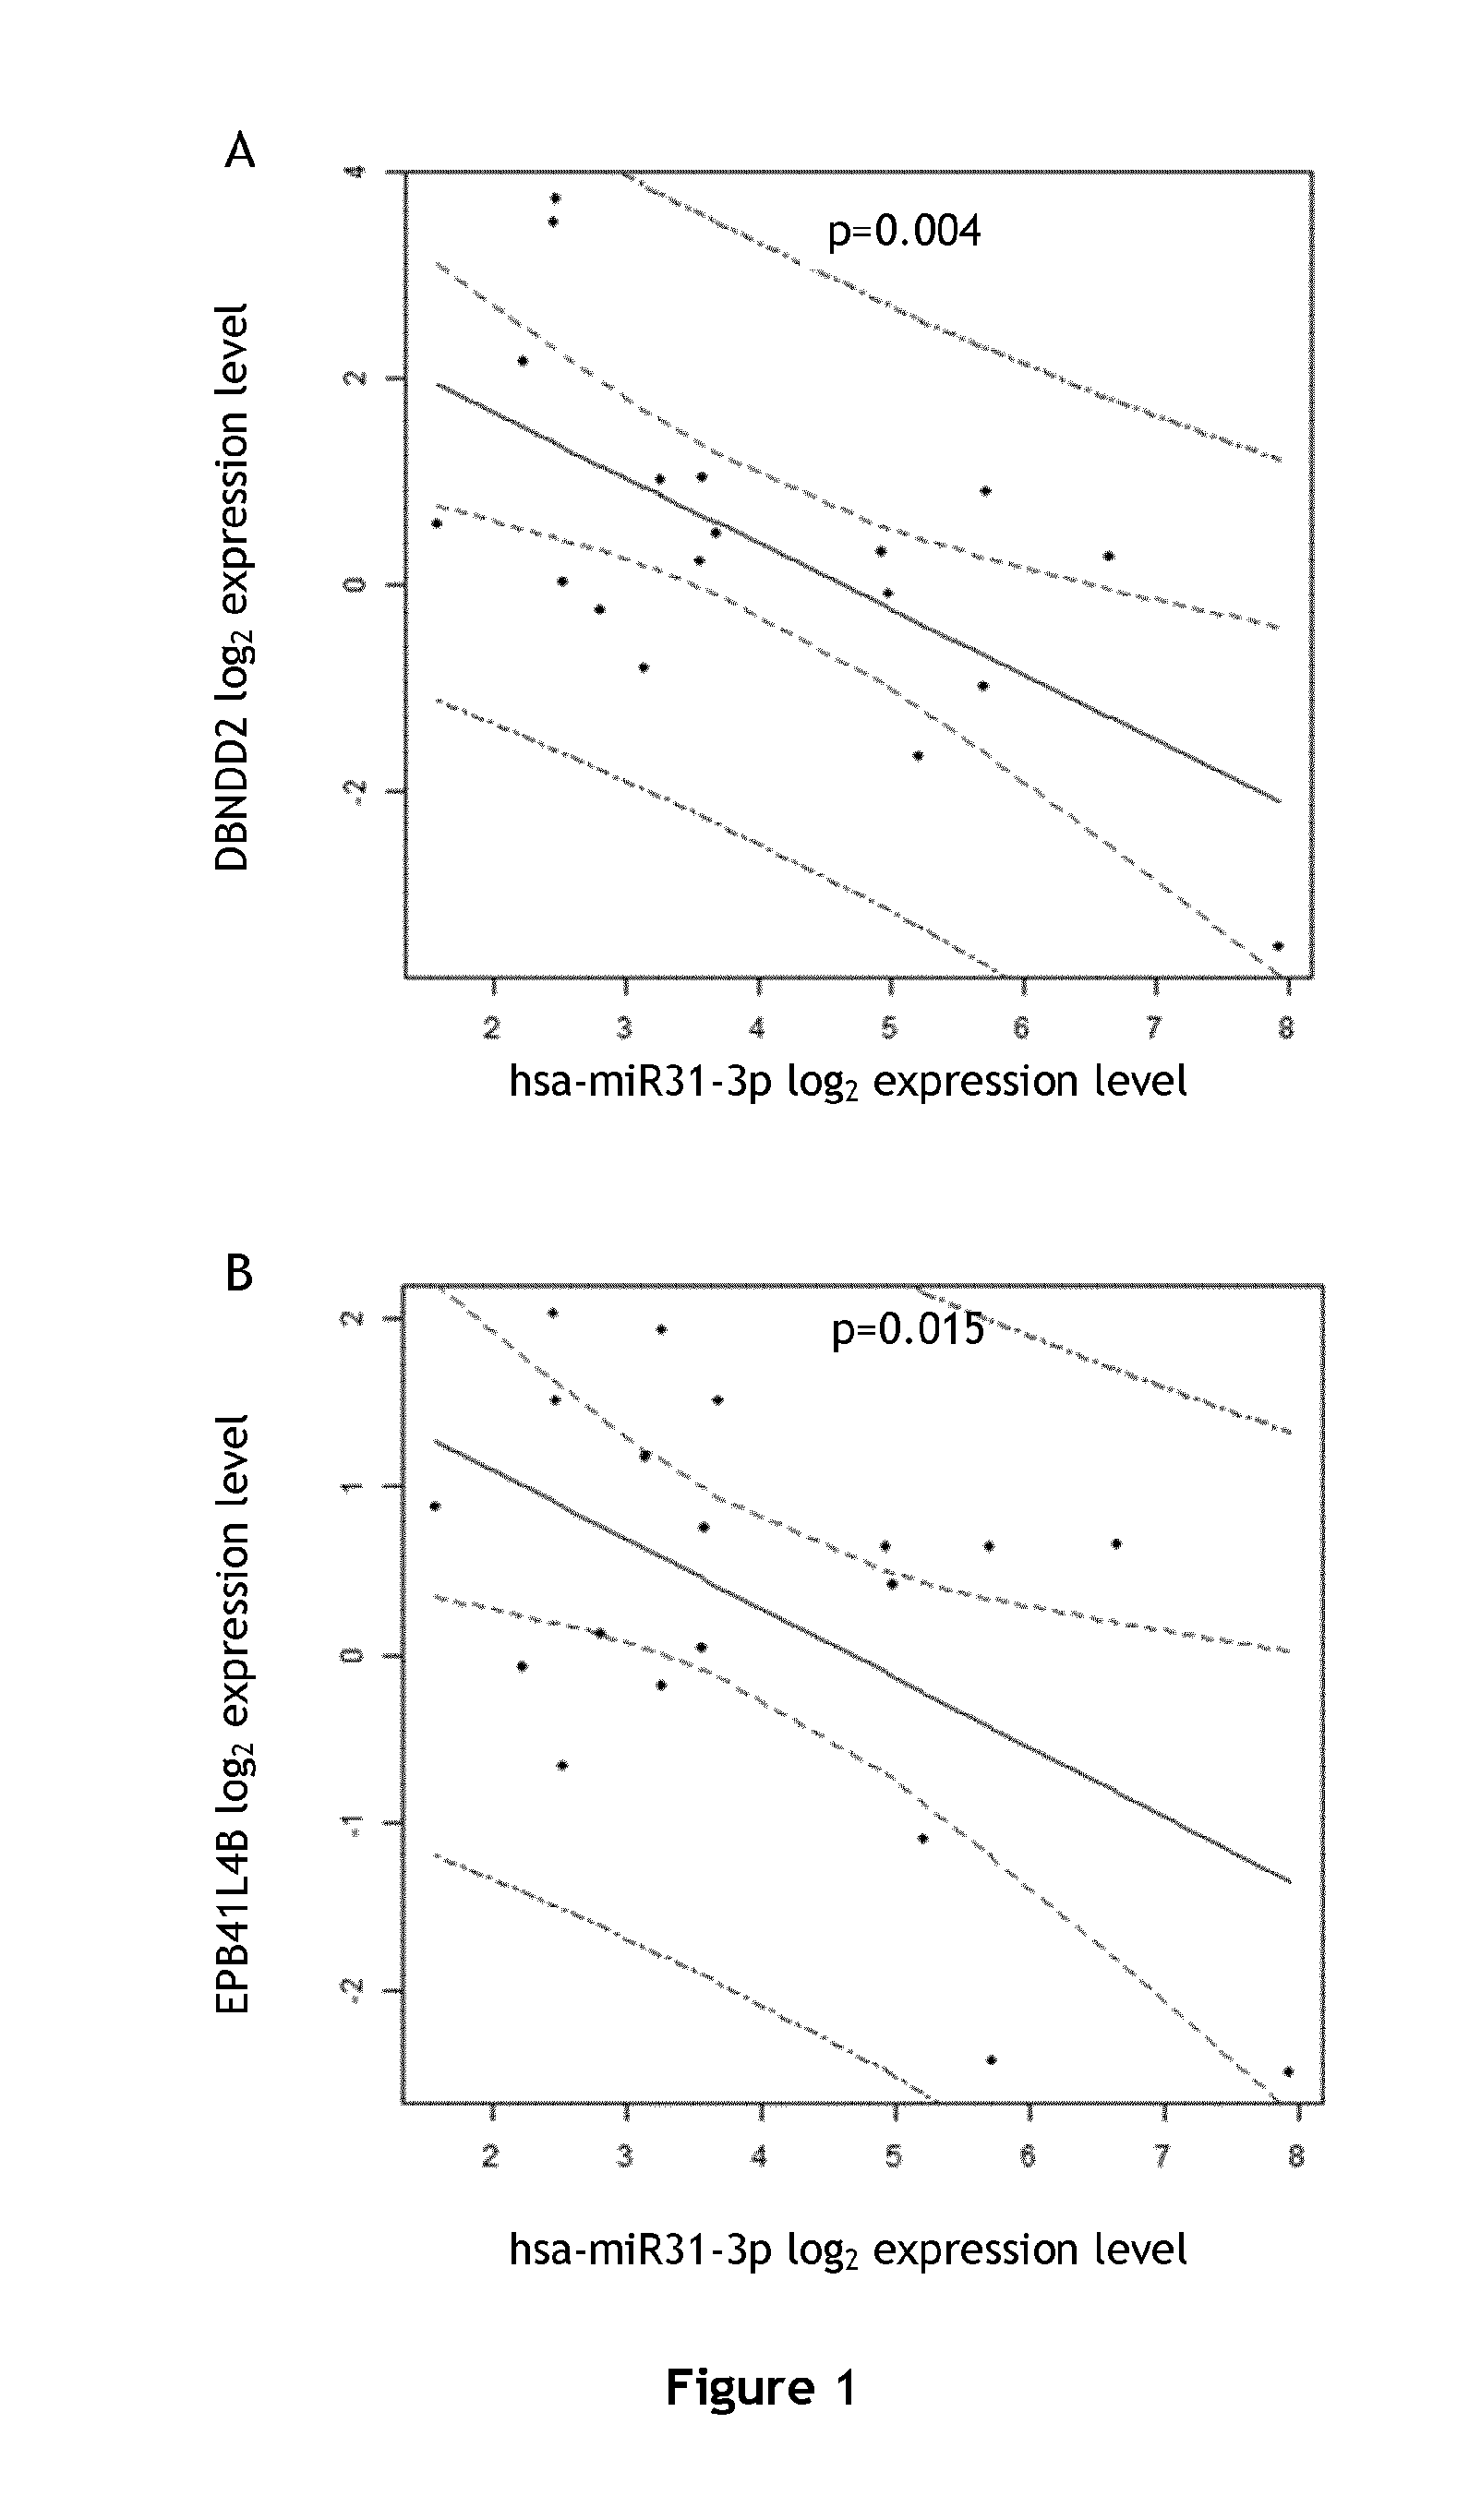 A method for predicting responsiveness to a treatment with an EGFR inhibitor